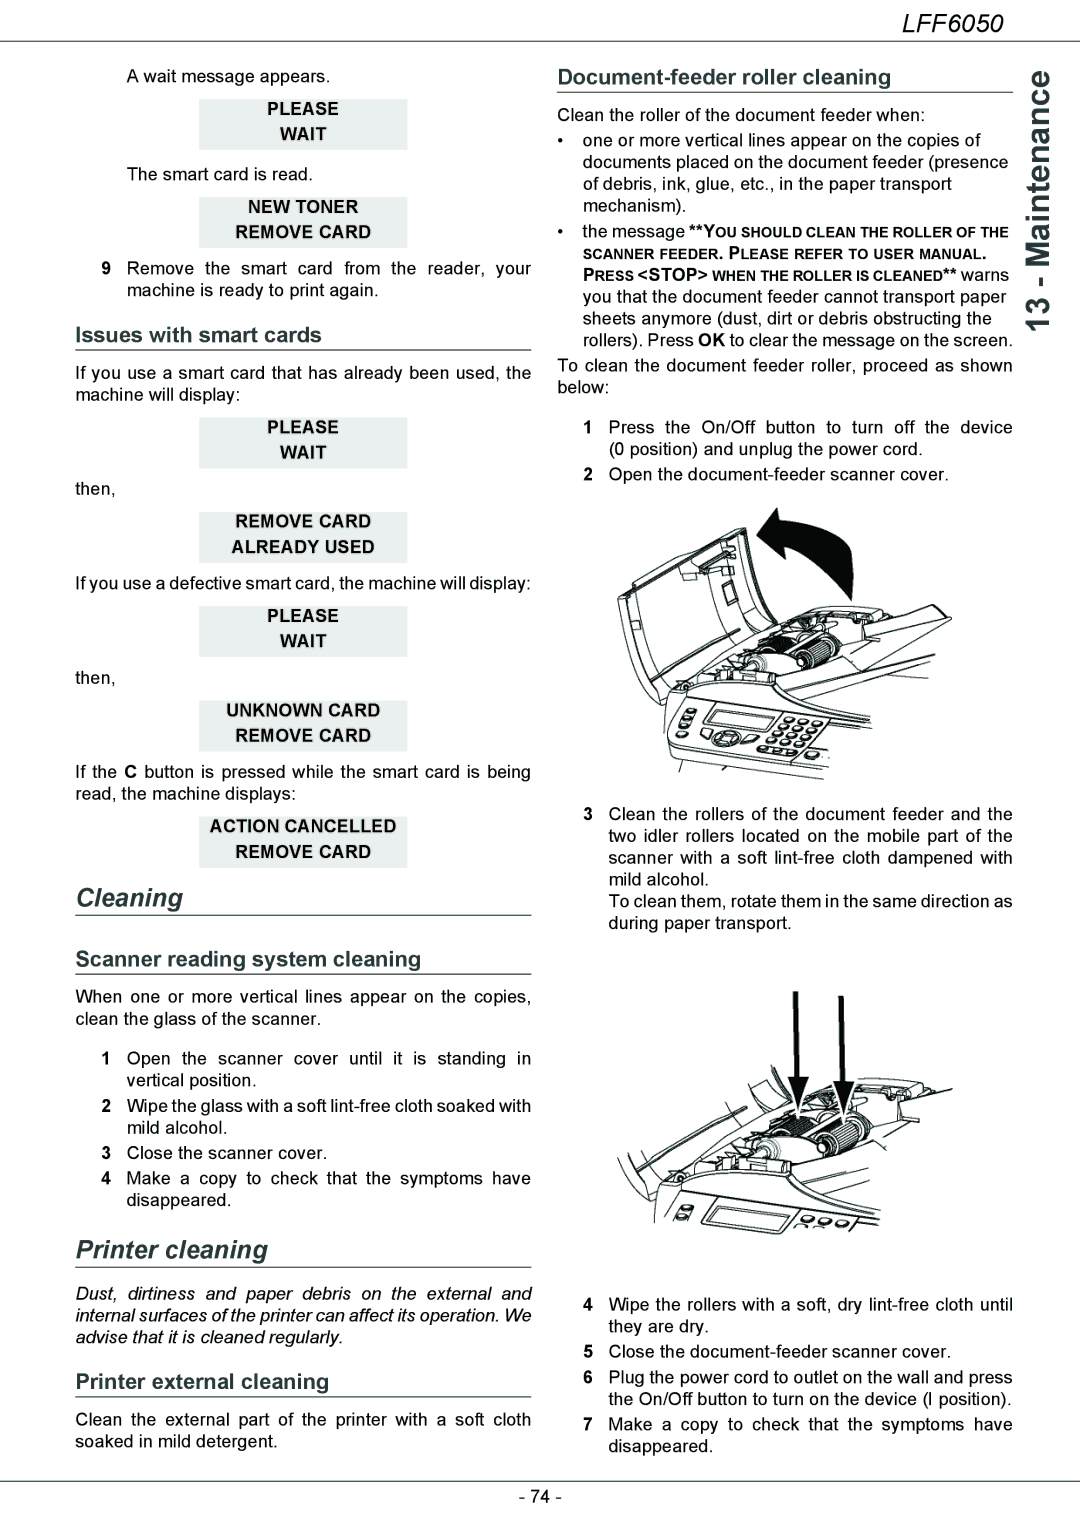 Philips LFF 6050, 253118301-A user manual Maintenance, Cleaning, Printer cleaning 